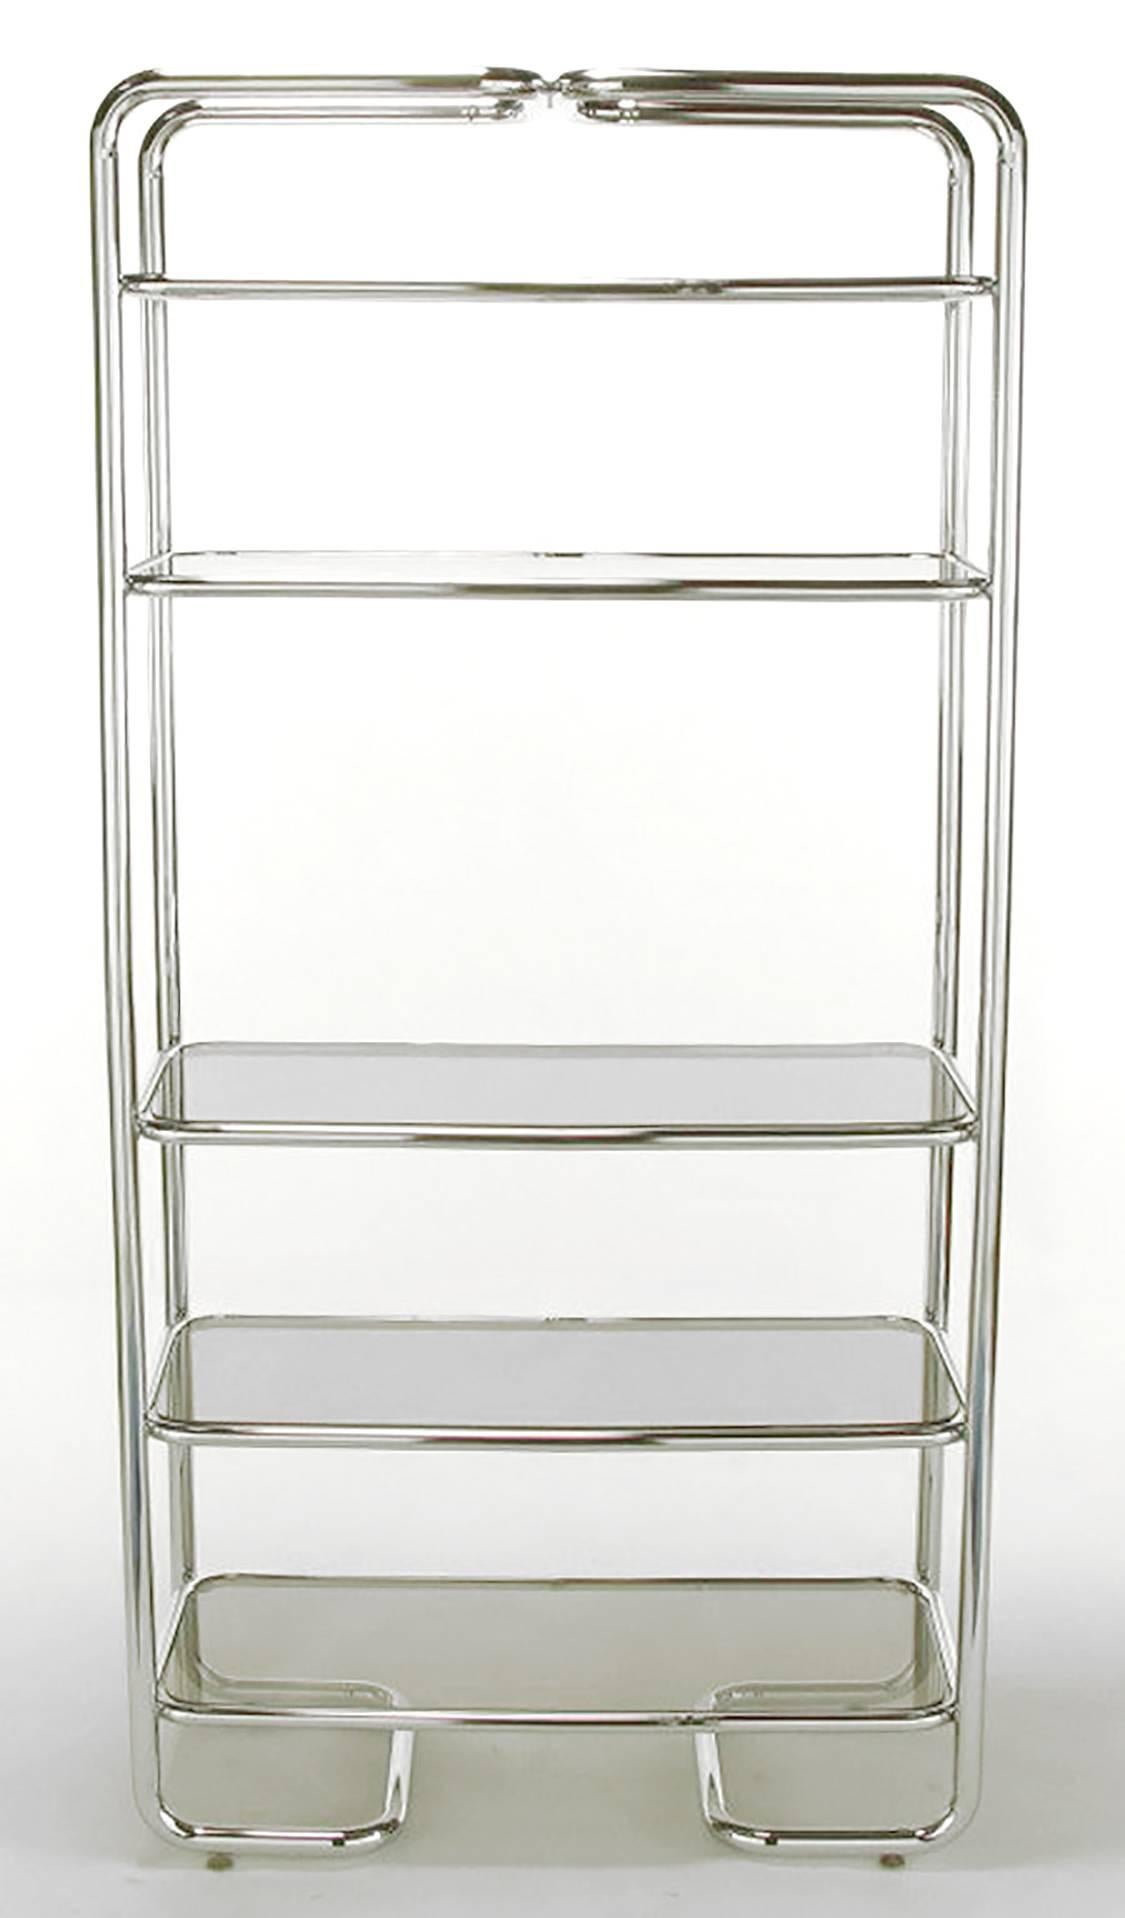 Soft rounded corners and chromed tubular steel étagère in the manner of John Mascheroni. Five shelves with inset smoked glass. Unusual return sled base.